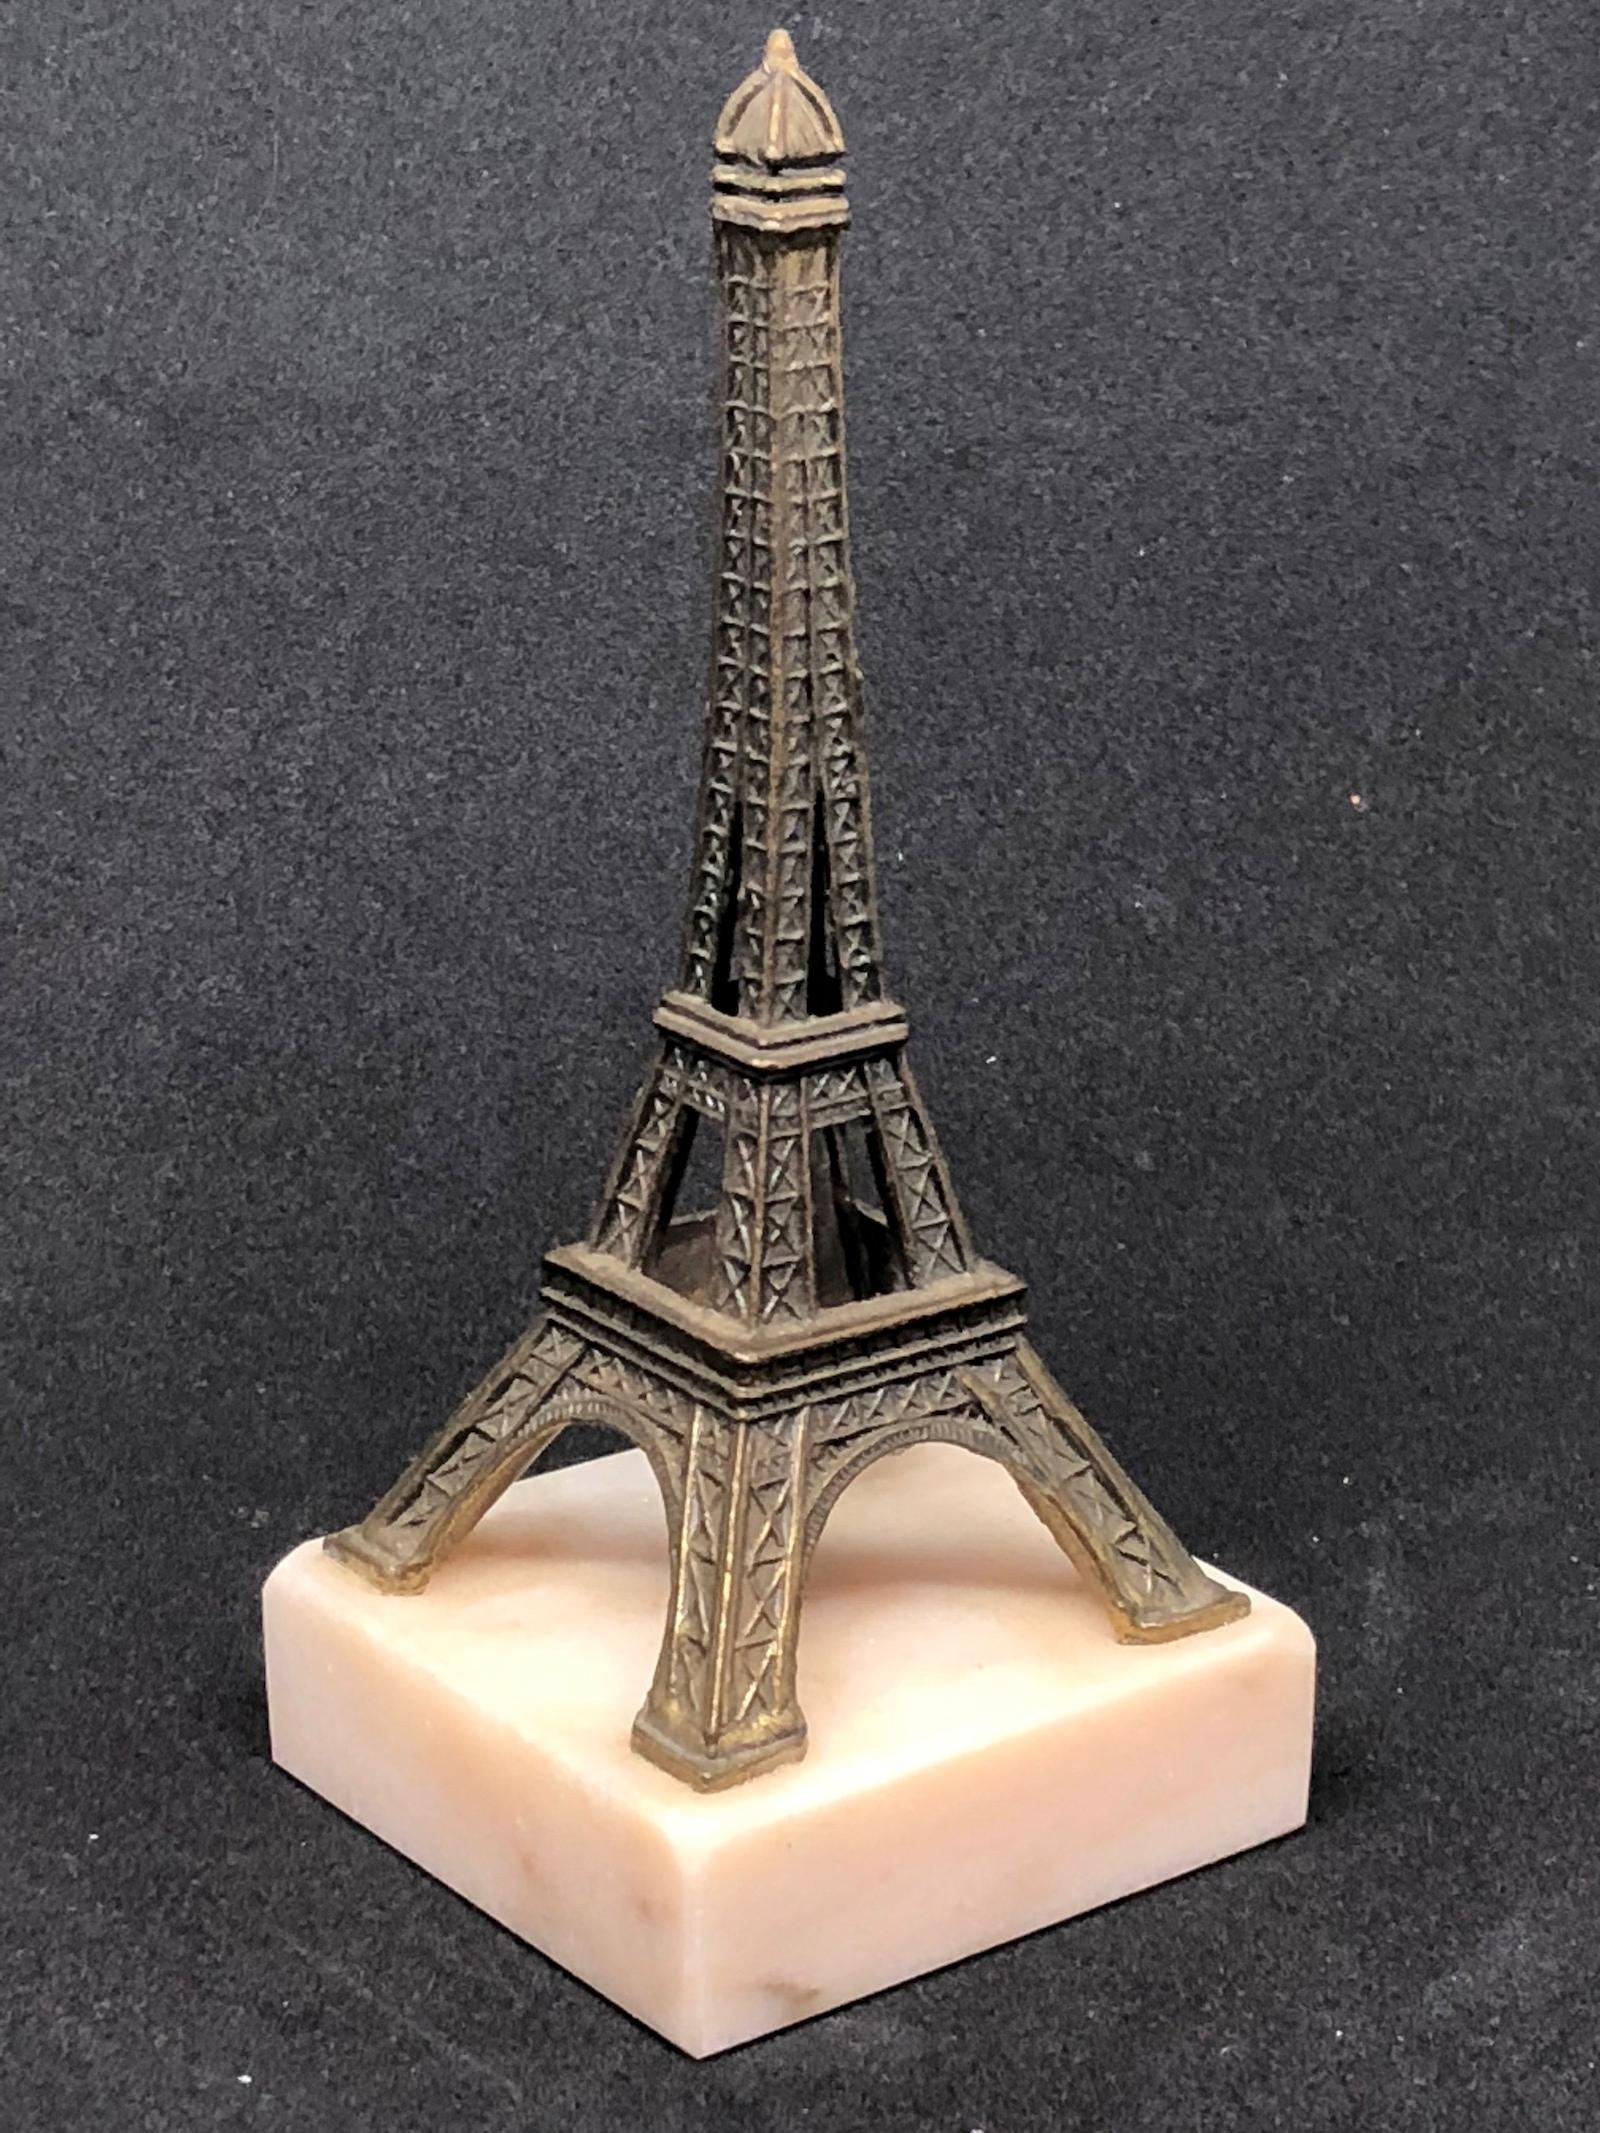 Eiffel Tower French 1930s Souvenir Building Architectural Model on Marble Base 1